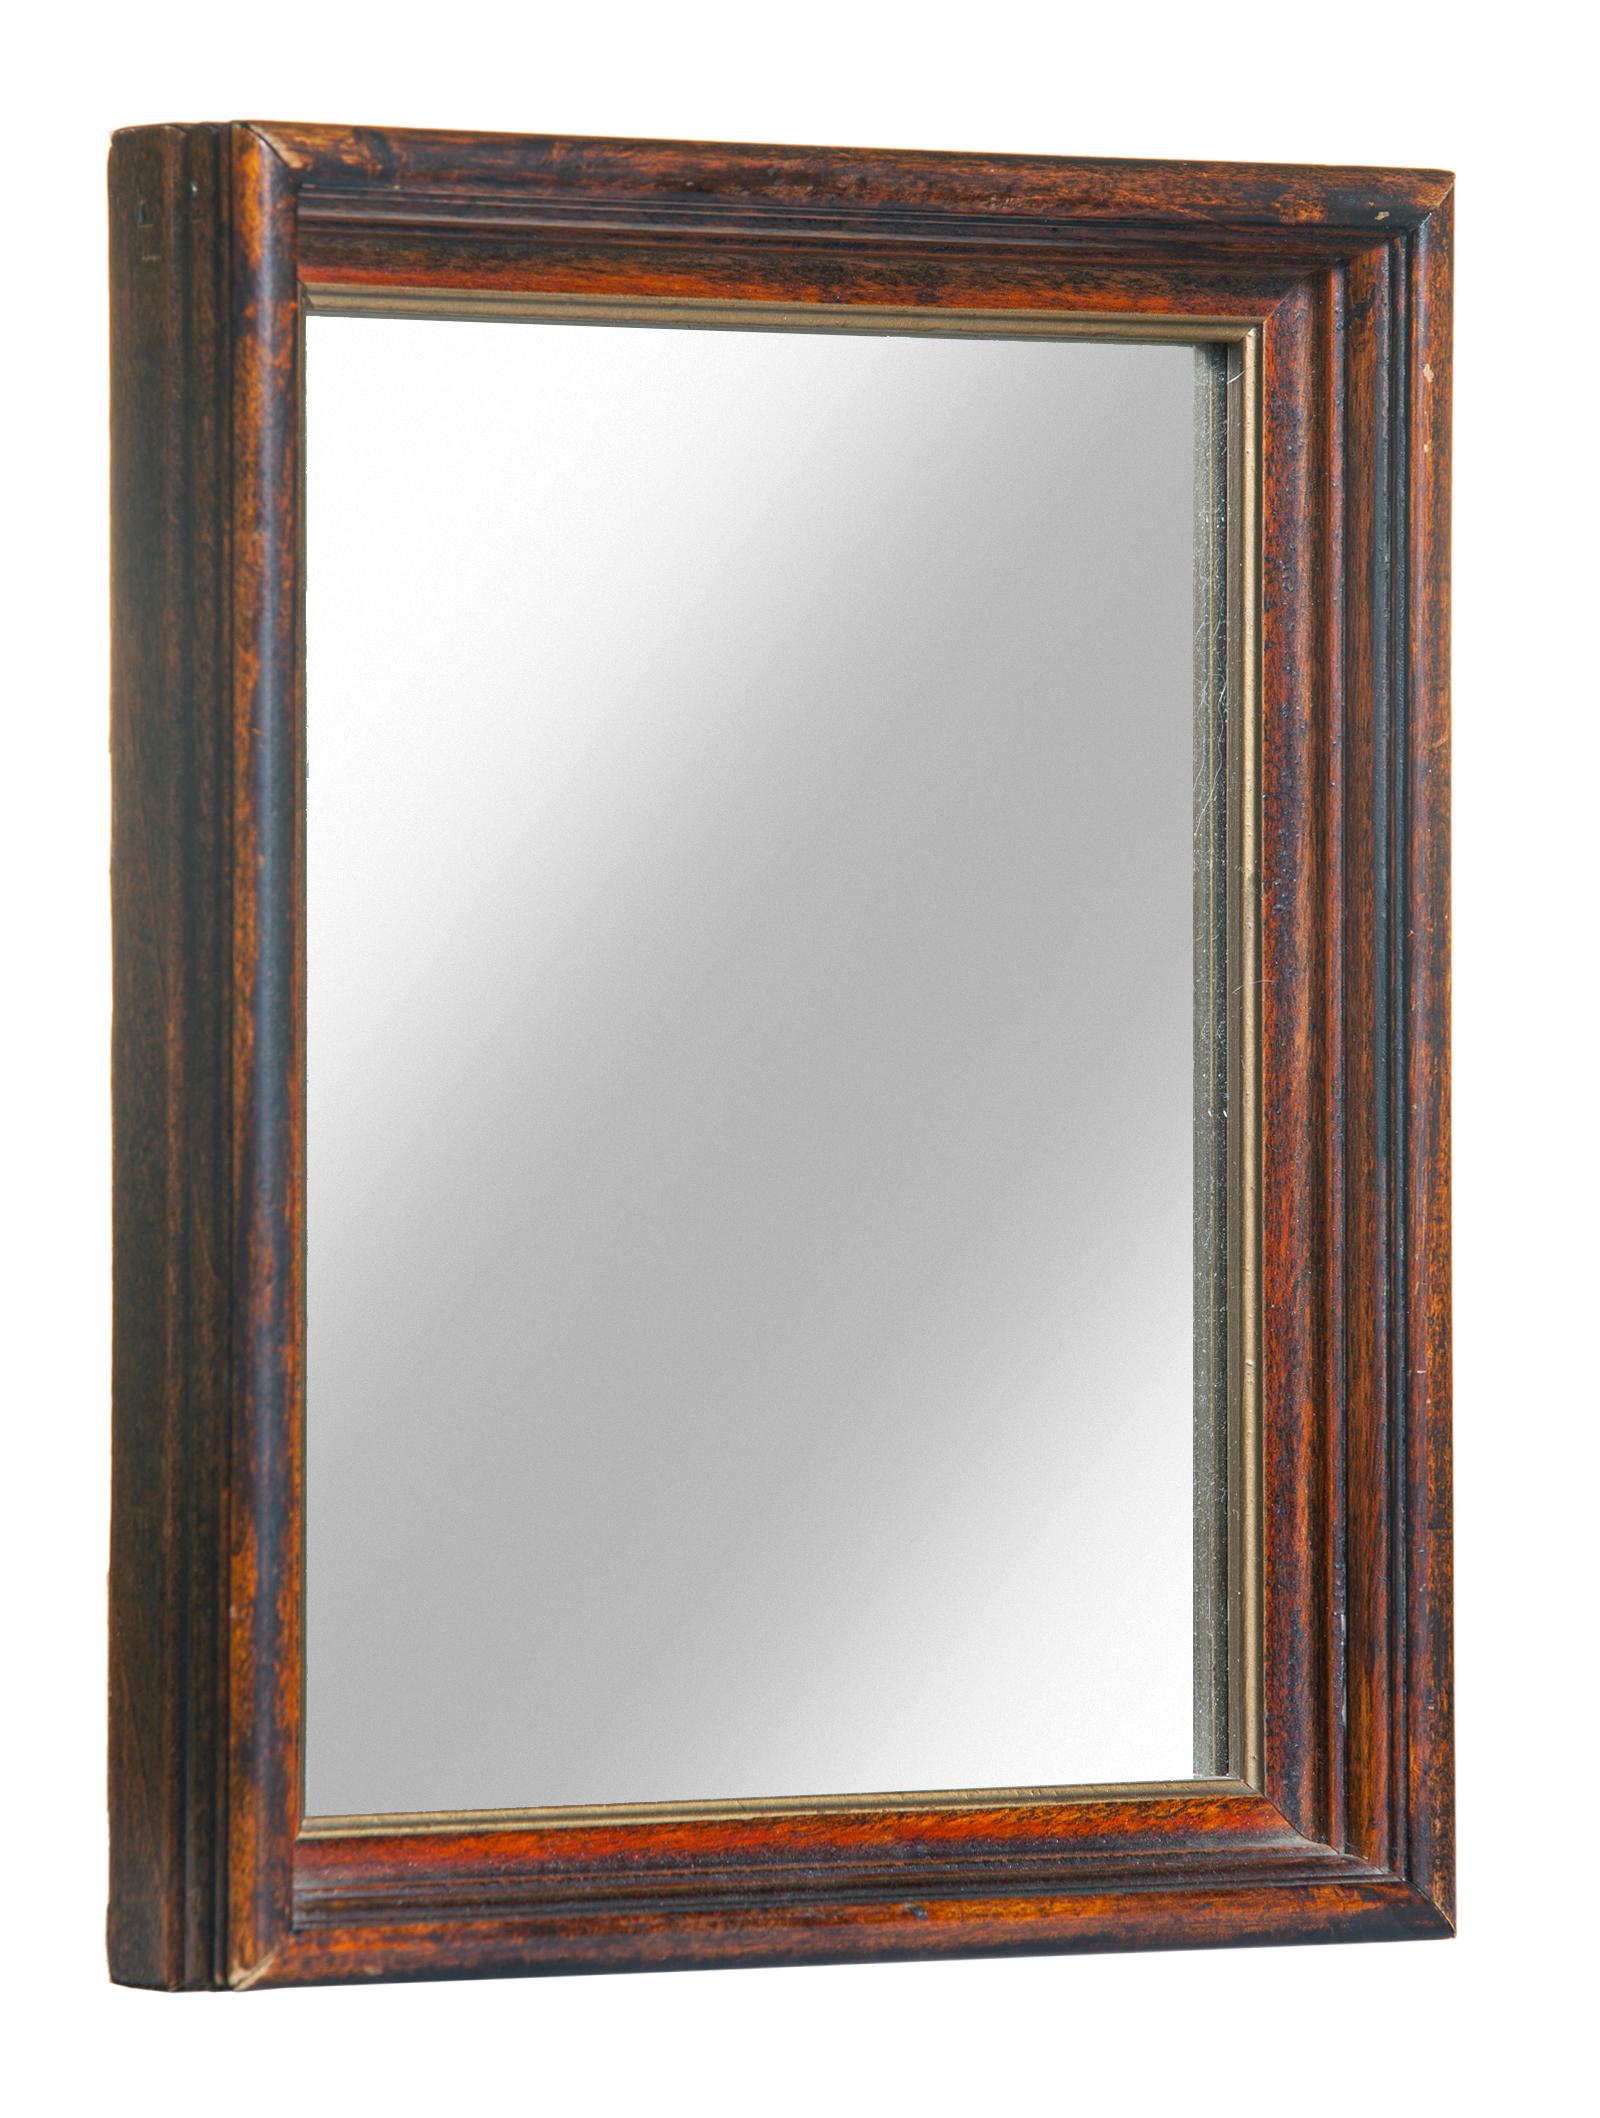 This lovely accent mirror adds a touch of elegance to any decor.
Handcrafted in walnut with original finish. 
New mirror & backing. 
Wired to hang both ways.